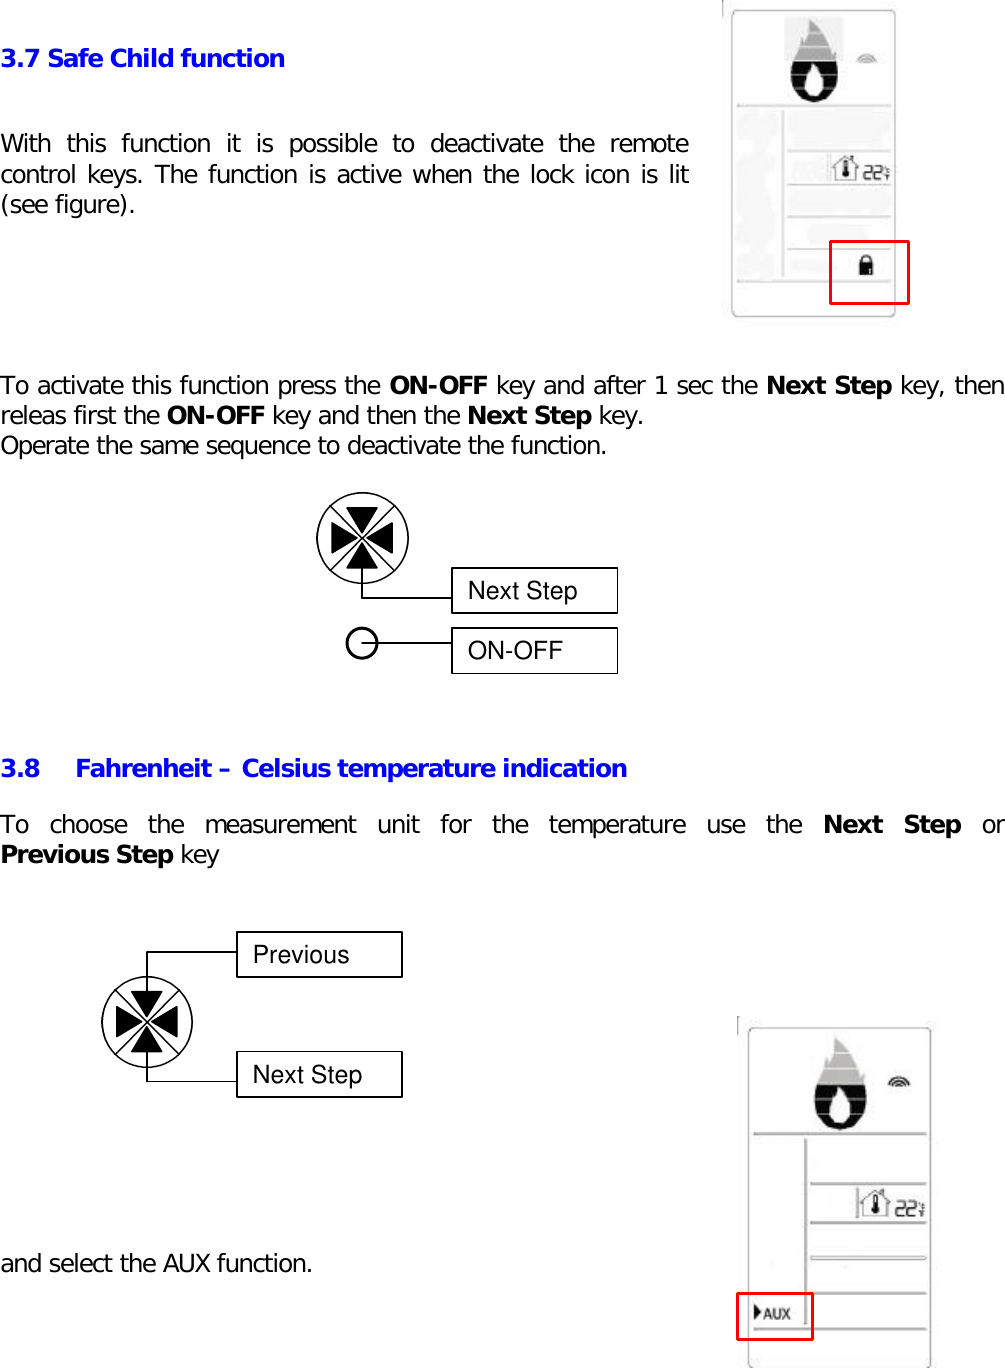 3.7 Safe Child functionWith this function it is possible to deactivate the remotecontrol keys. The function is active when the lock icon is lit(see figure).To activate this function press the ON-OFF key and after 1 sec the Next Step key, thenreleas first the ON-OFF key and then the Next Step key.Operate the same sequence to deactivate the function.3.8 Fahrenheit – Celsius temperature indicationTo choose the measurement unit for the temperature use the Next Step orPrevious Step keyand select the AUX function.Next StepON-OFFPreviousNext Step